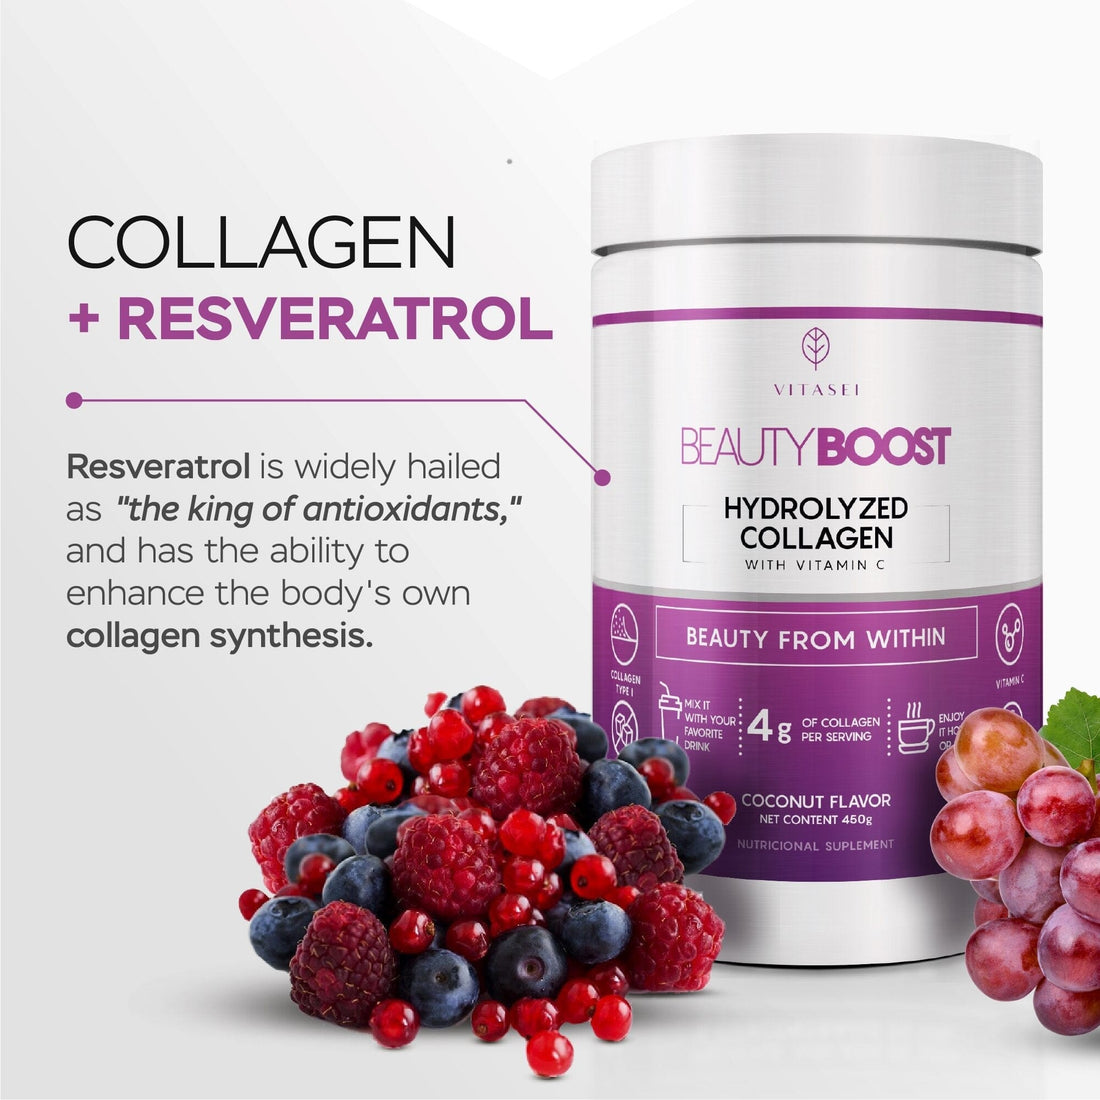 COMBO HYDROLYZED COLLAGEN WITH RESVERATROL COCONUT FLAVOR AND UNFLAVORED + HYDROLIZED COLLAGEN CAPSULES